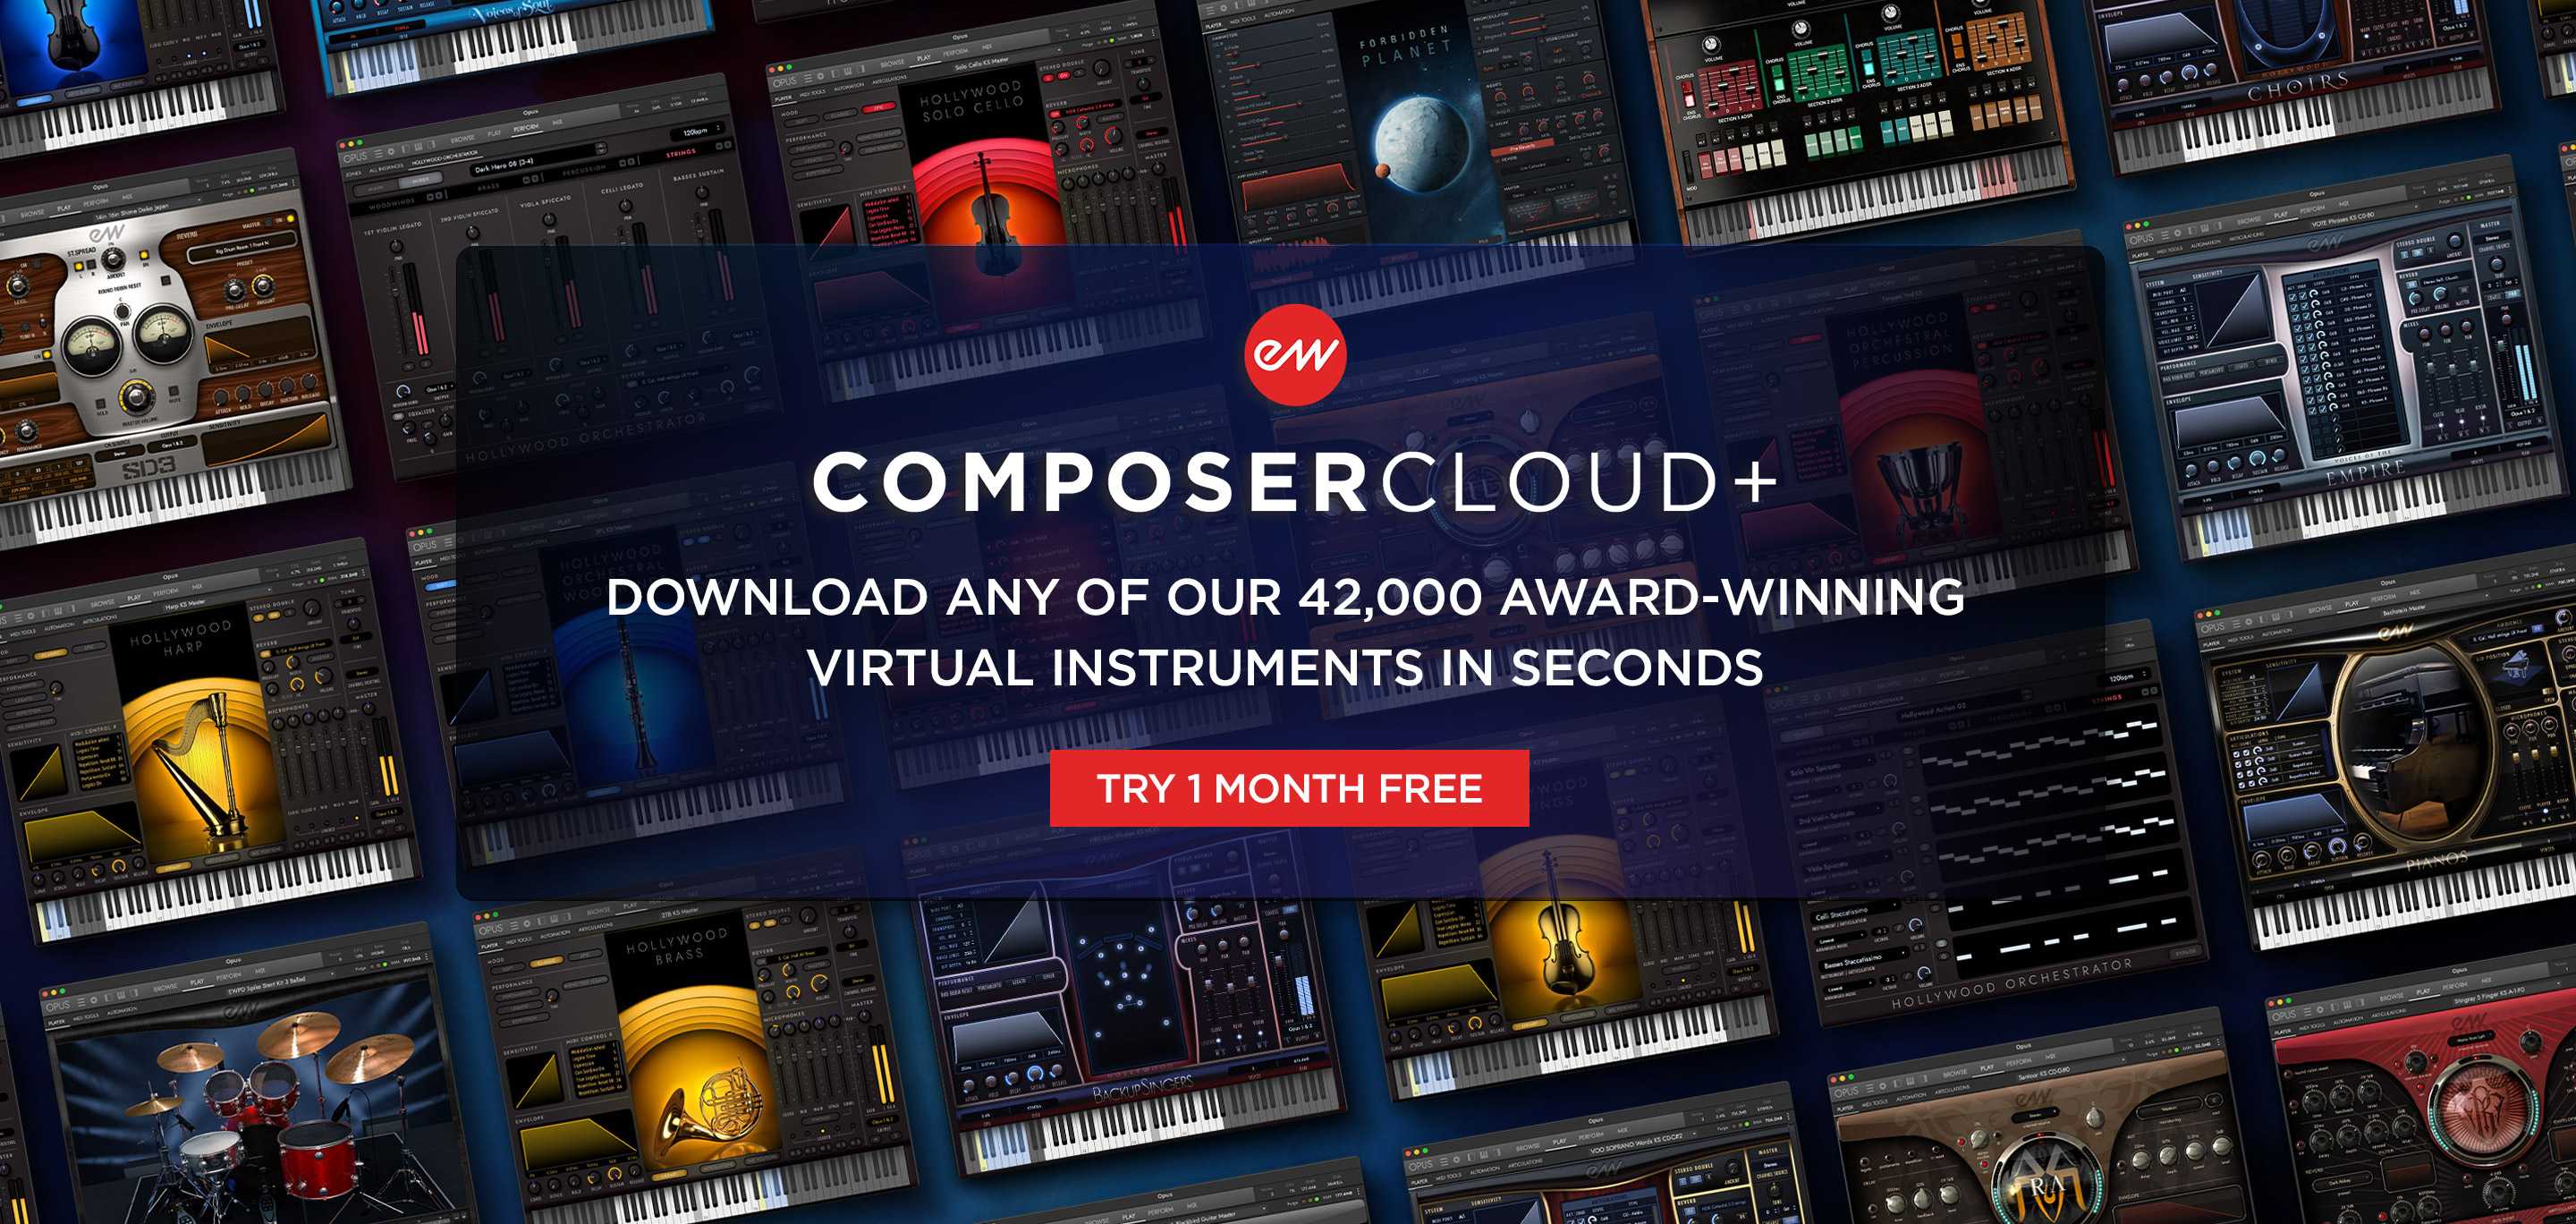 EastWest ComposerCloud+ Download any of our award-winning virtual instruments in seconds